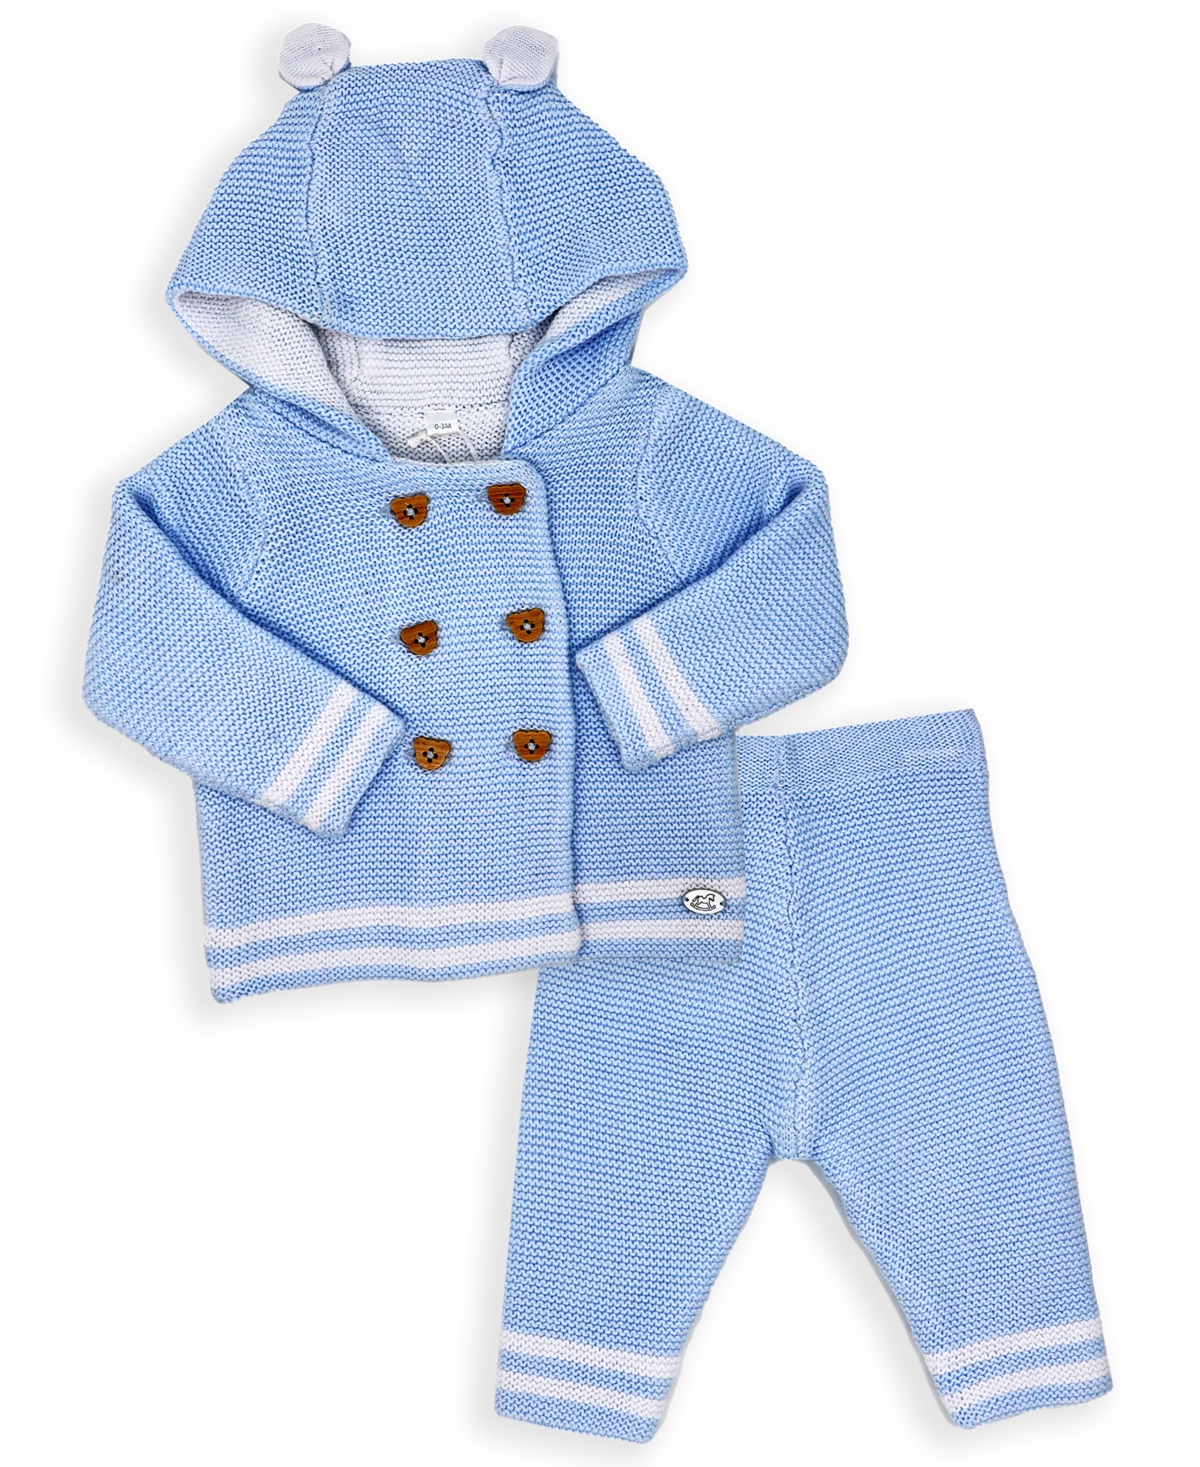 3 Stories Trading Baby Boys Knit Hooded Sweater And Pant, 2 Piece Set In Blue